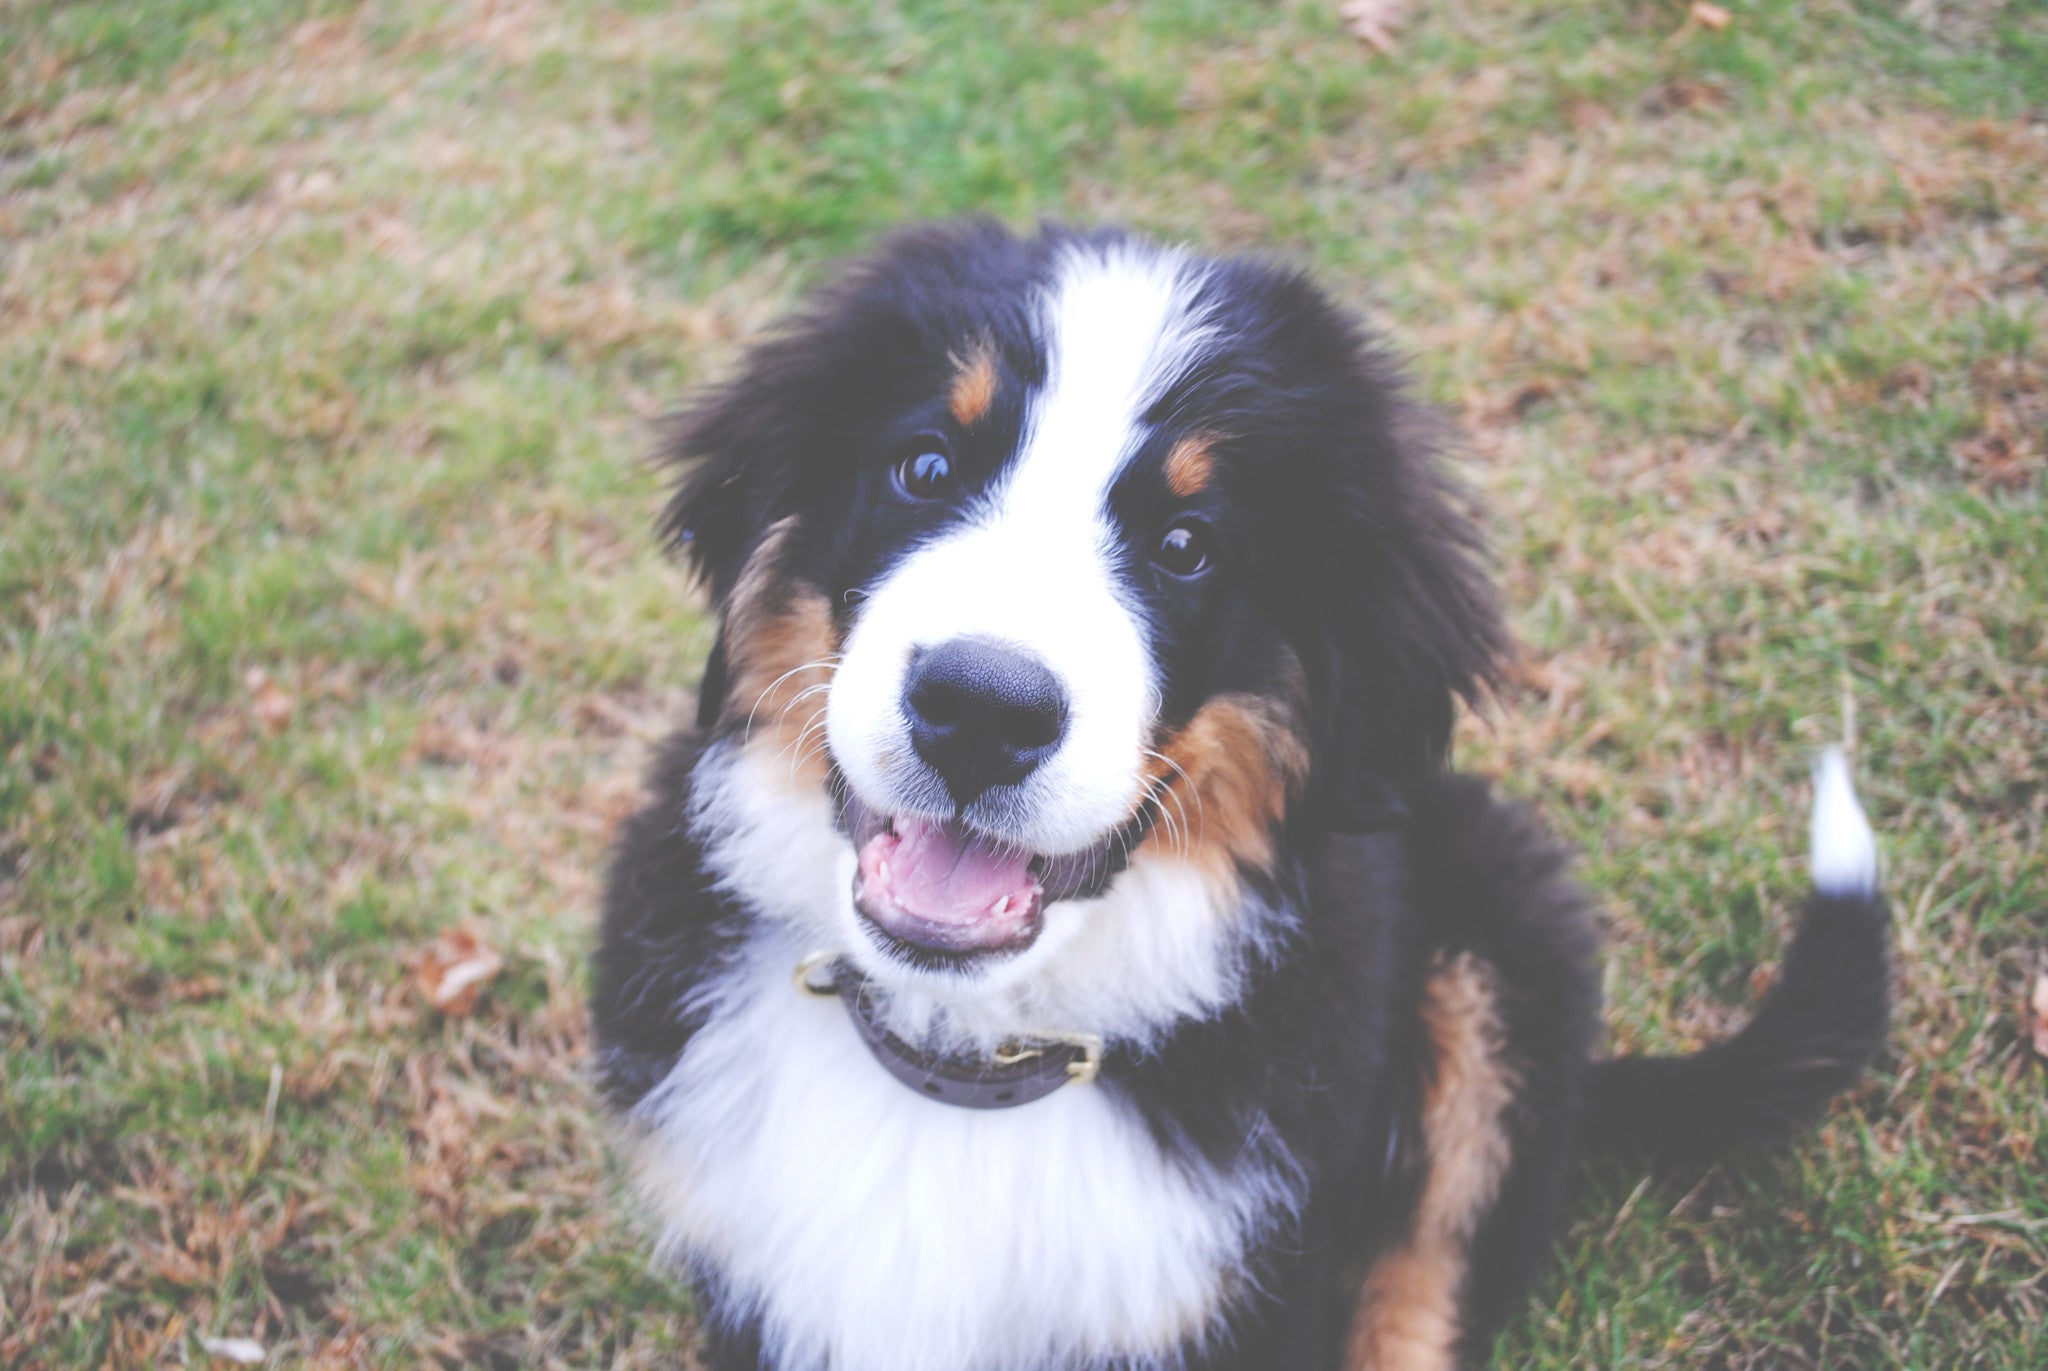 Photo Shoot with our Favorite Bernese Mountain Dog Puppy